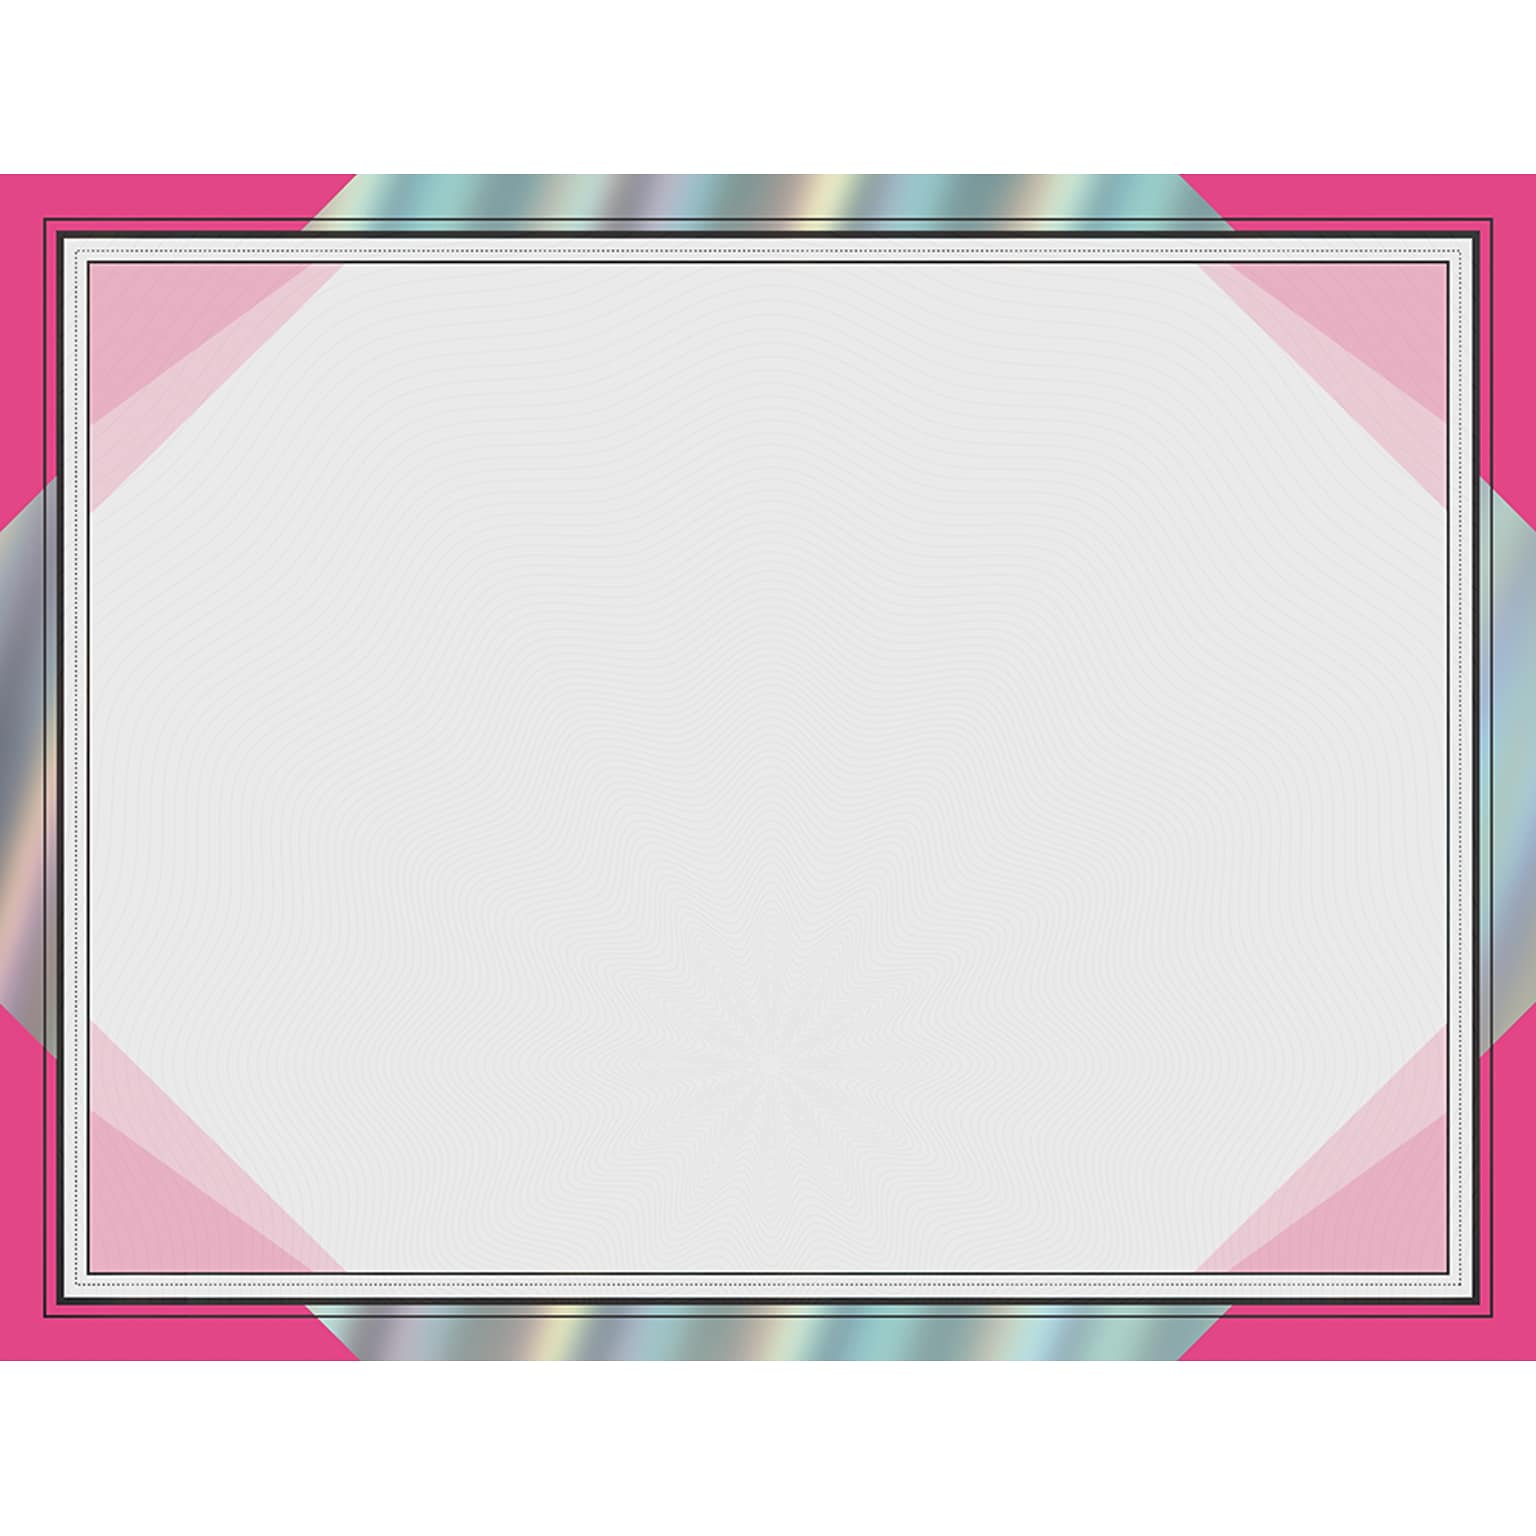 Great Papers Rainbow Foil Certificates, 8.5 x 11, Happy Pink, 15/Pack (2019003)